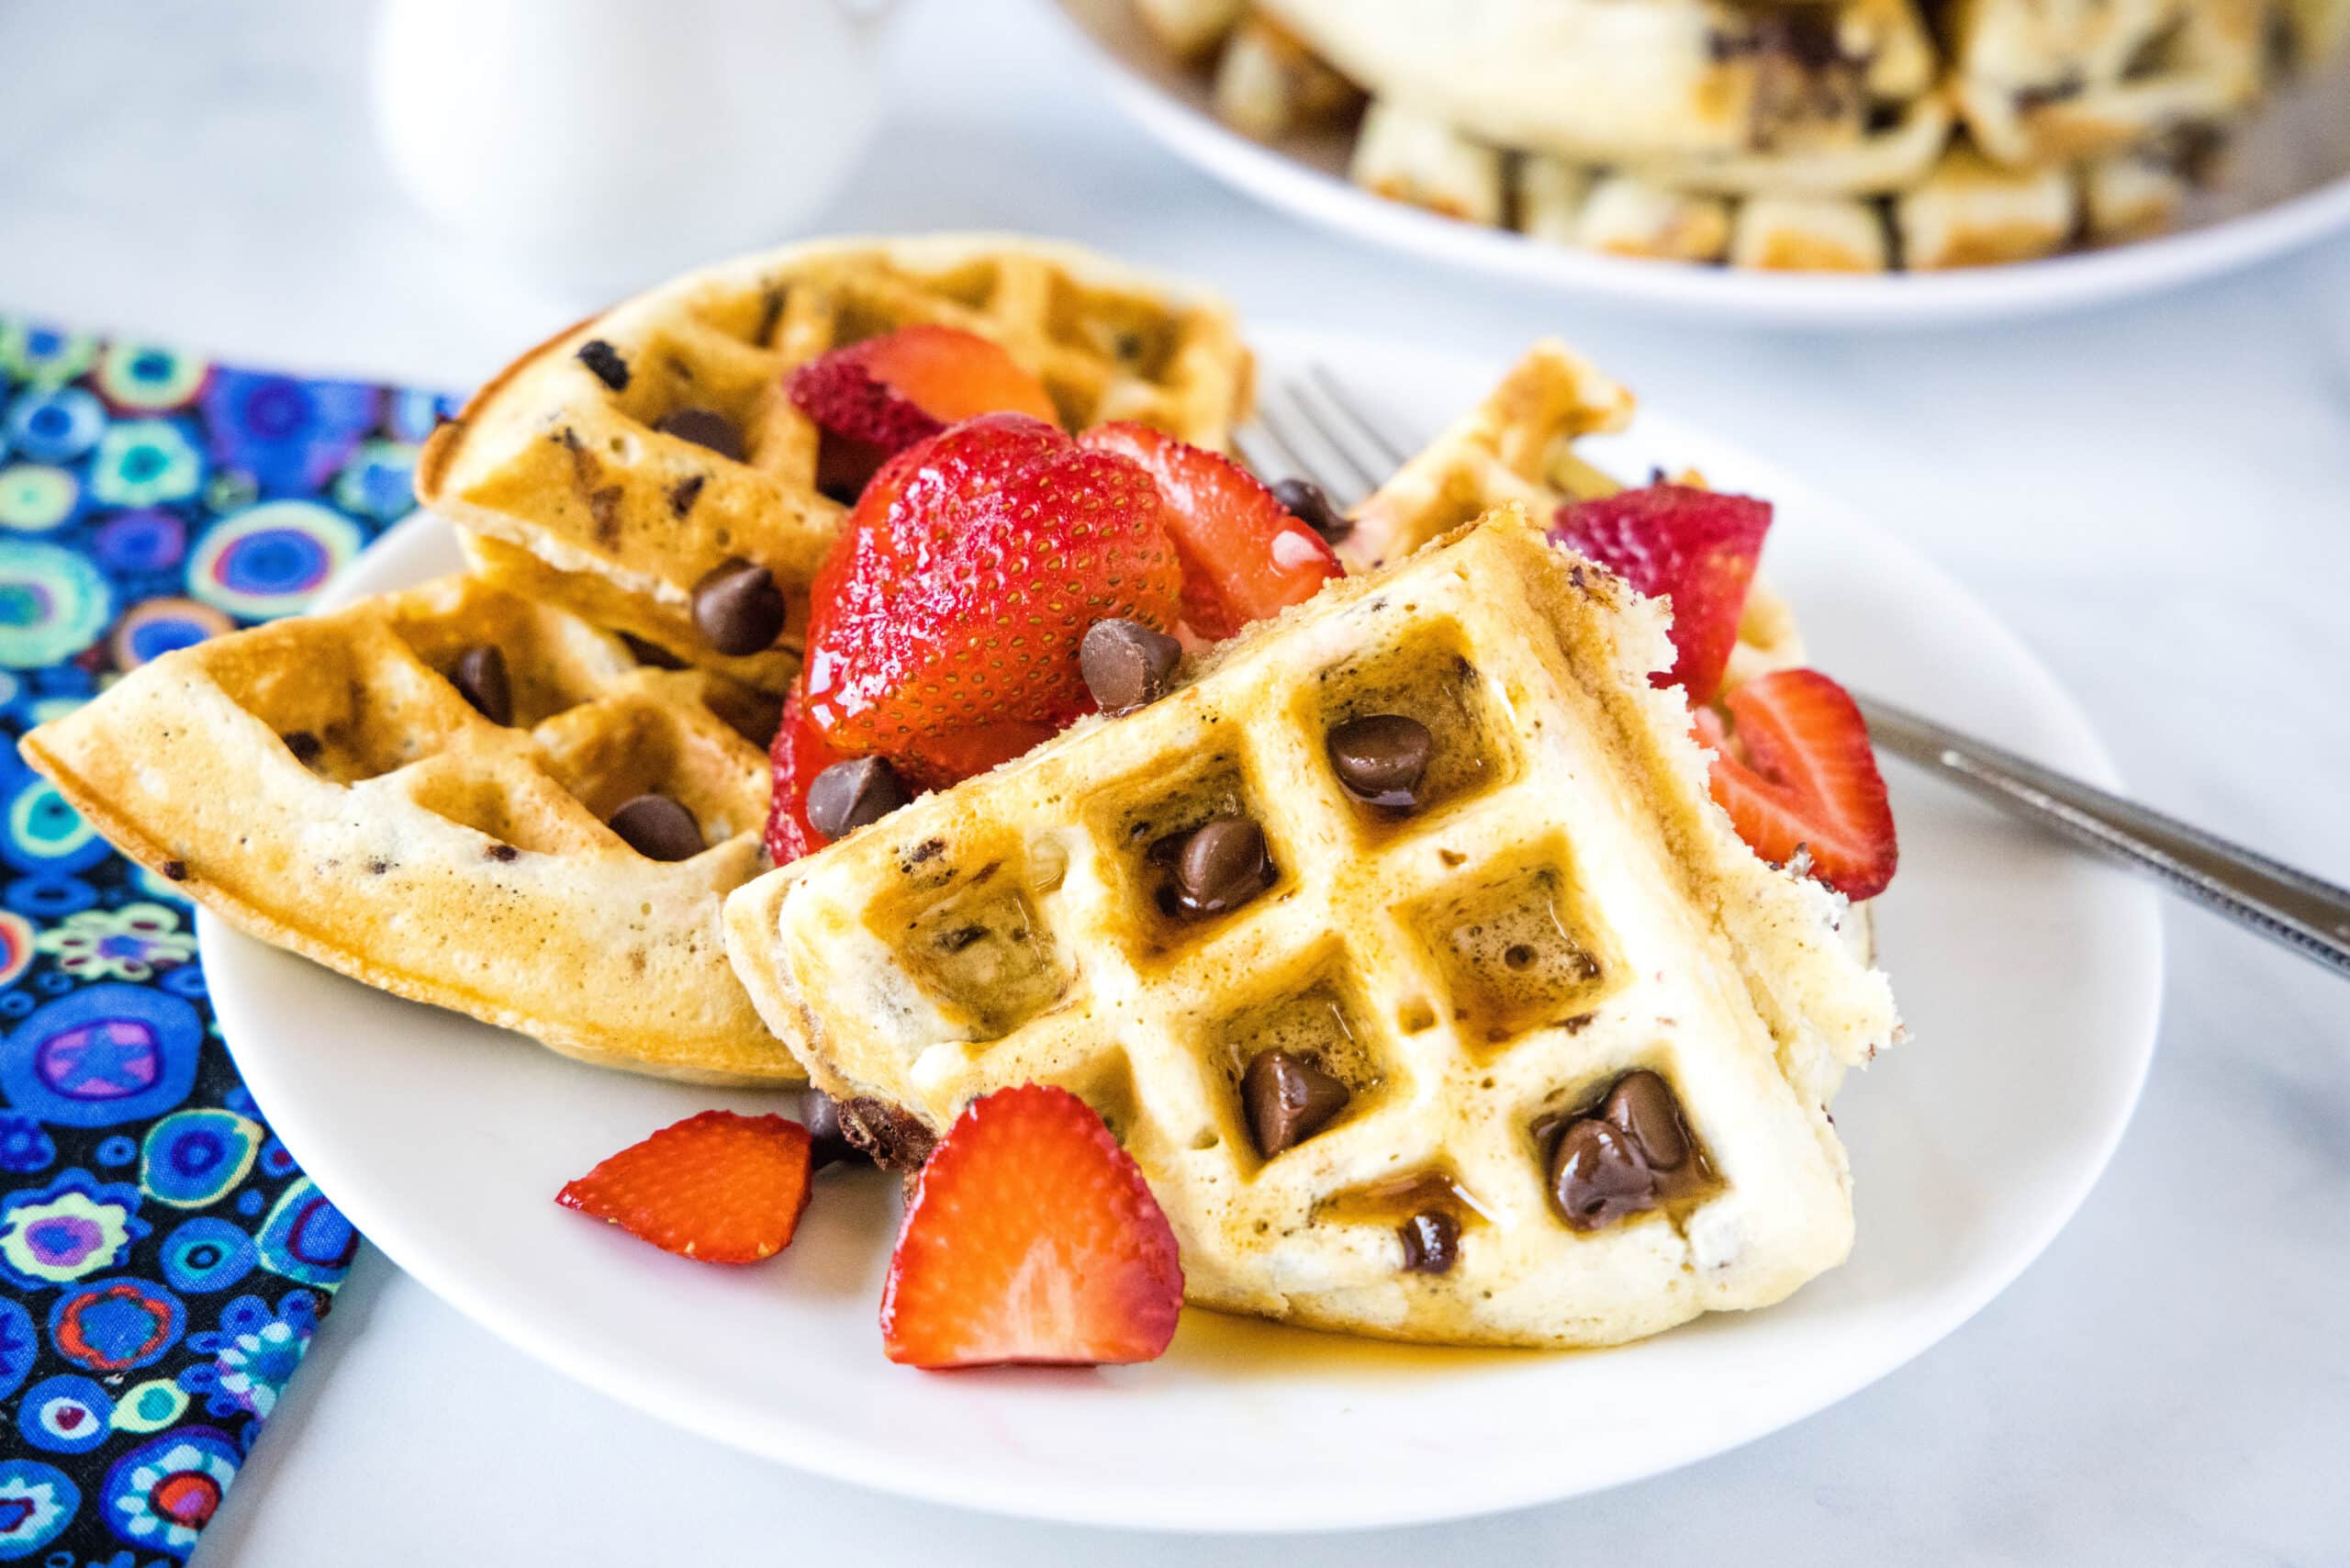 Chocolate Chip Waffles - Light and fluffy waffles full of chocolate chips. The perfect sweet breakfast treat topped with fruit, syrup or even whipped cream!